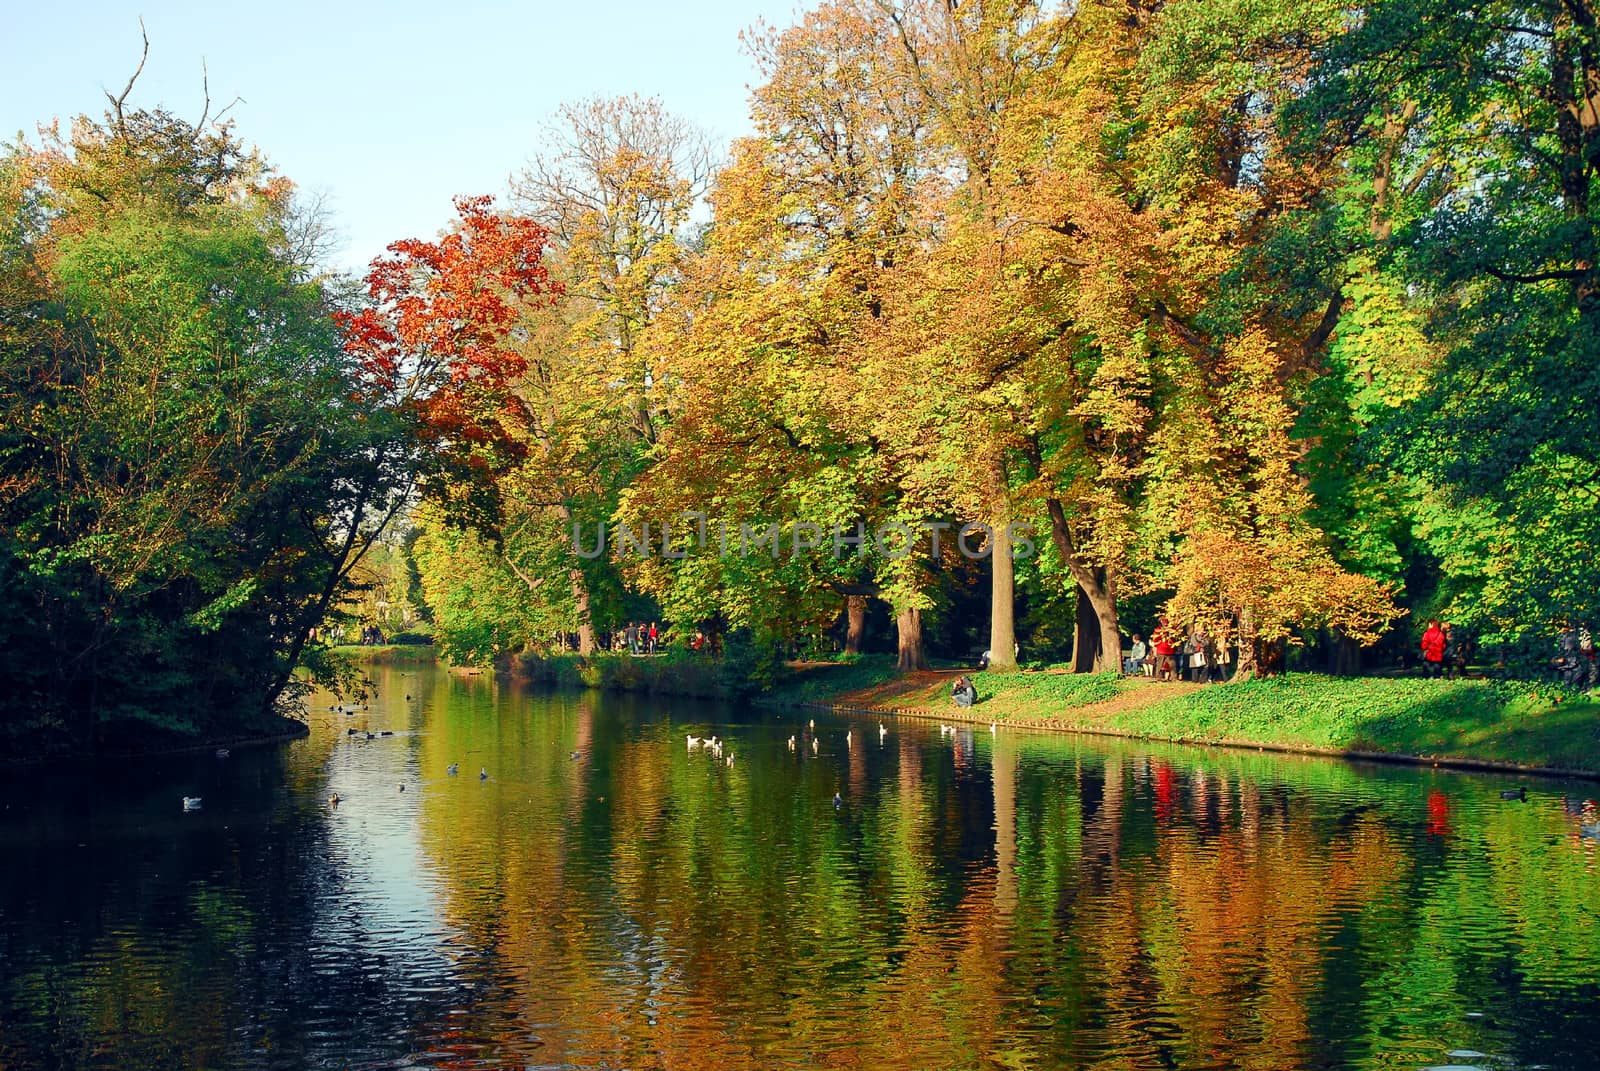 Royal Park in Lazienki in Warsaw. Autumn time.